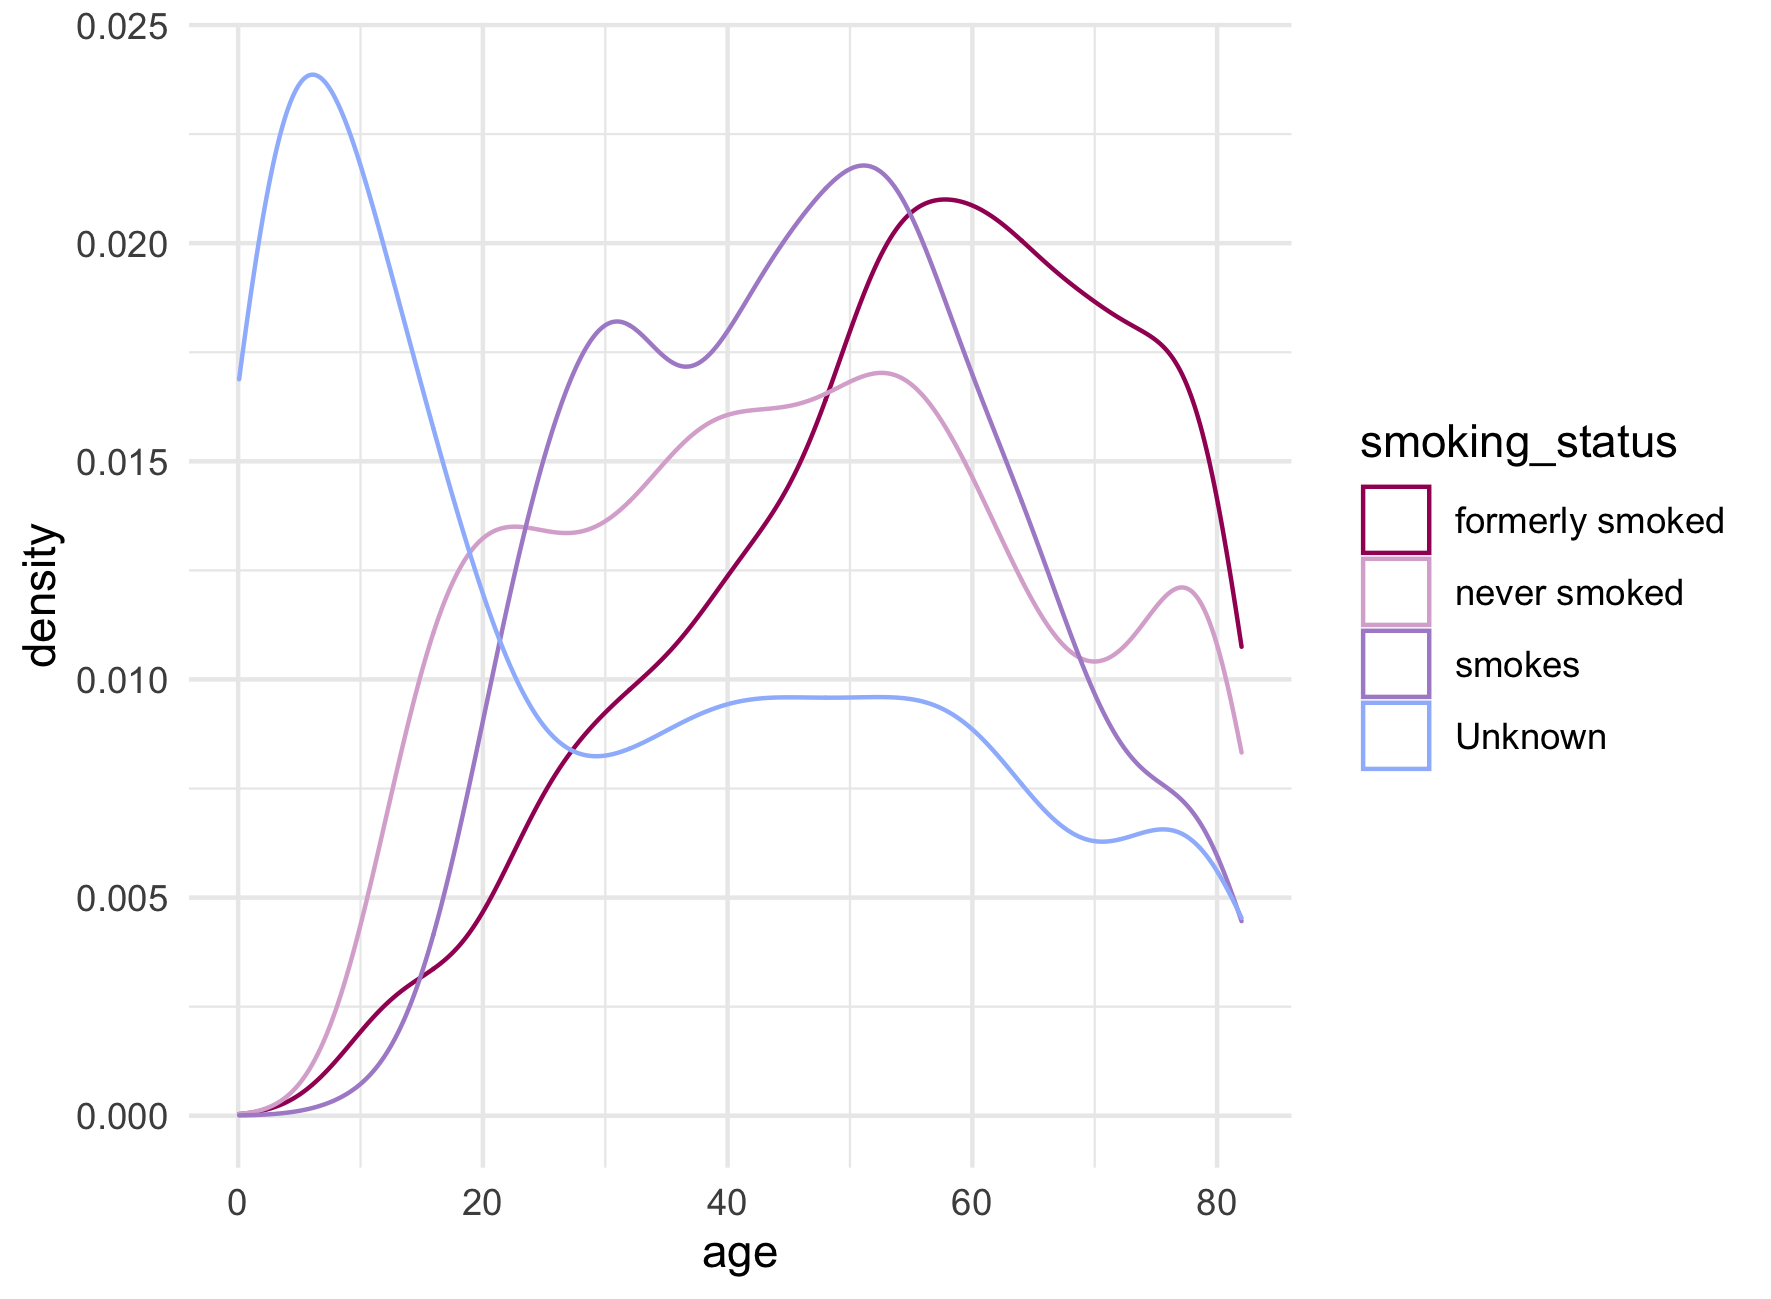 A line graph describing the proportion of patients by smoking status and age. The X-axis represents continuous age beginning at zero and the Y-axis represents the proportion of of patients. There are four lines; one for each of the smoking status categories 'never smoked', 'formerly smoked', 'smokes' and 'unknown'. Each of the four smoking categories shows a different age distribution with never, former and current smokers increasing in proportion of patients as age increases up to between 40 years and 60 years old, after which the proportions begin to drop. The unknown category has a very different distribution with a large spike between zero and 20 and a lower proportion in the older ages compared to the three other smoking categories.